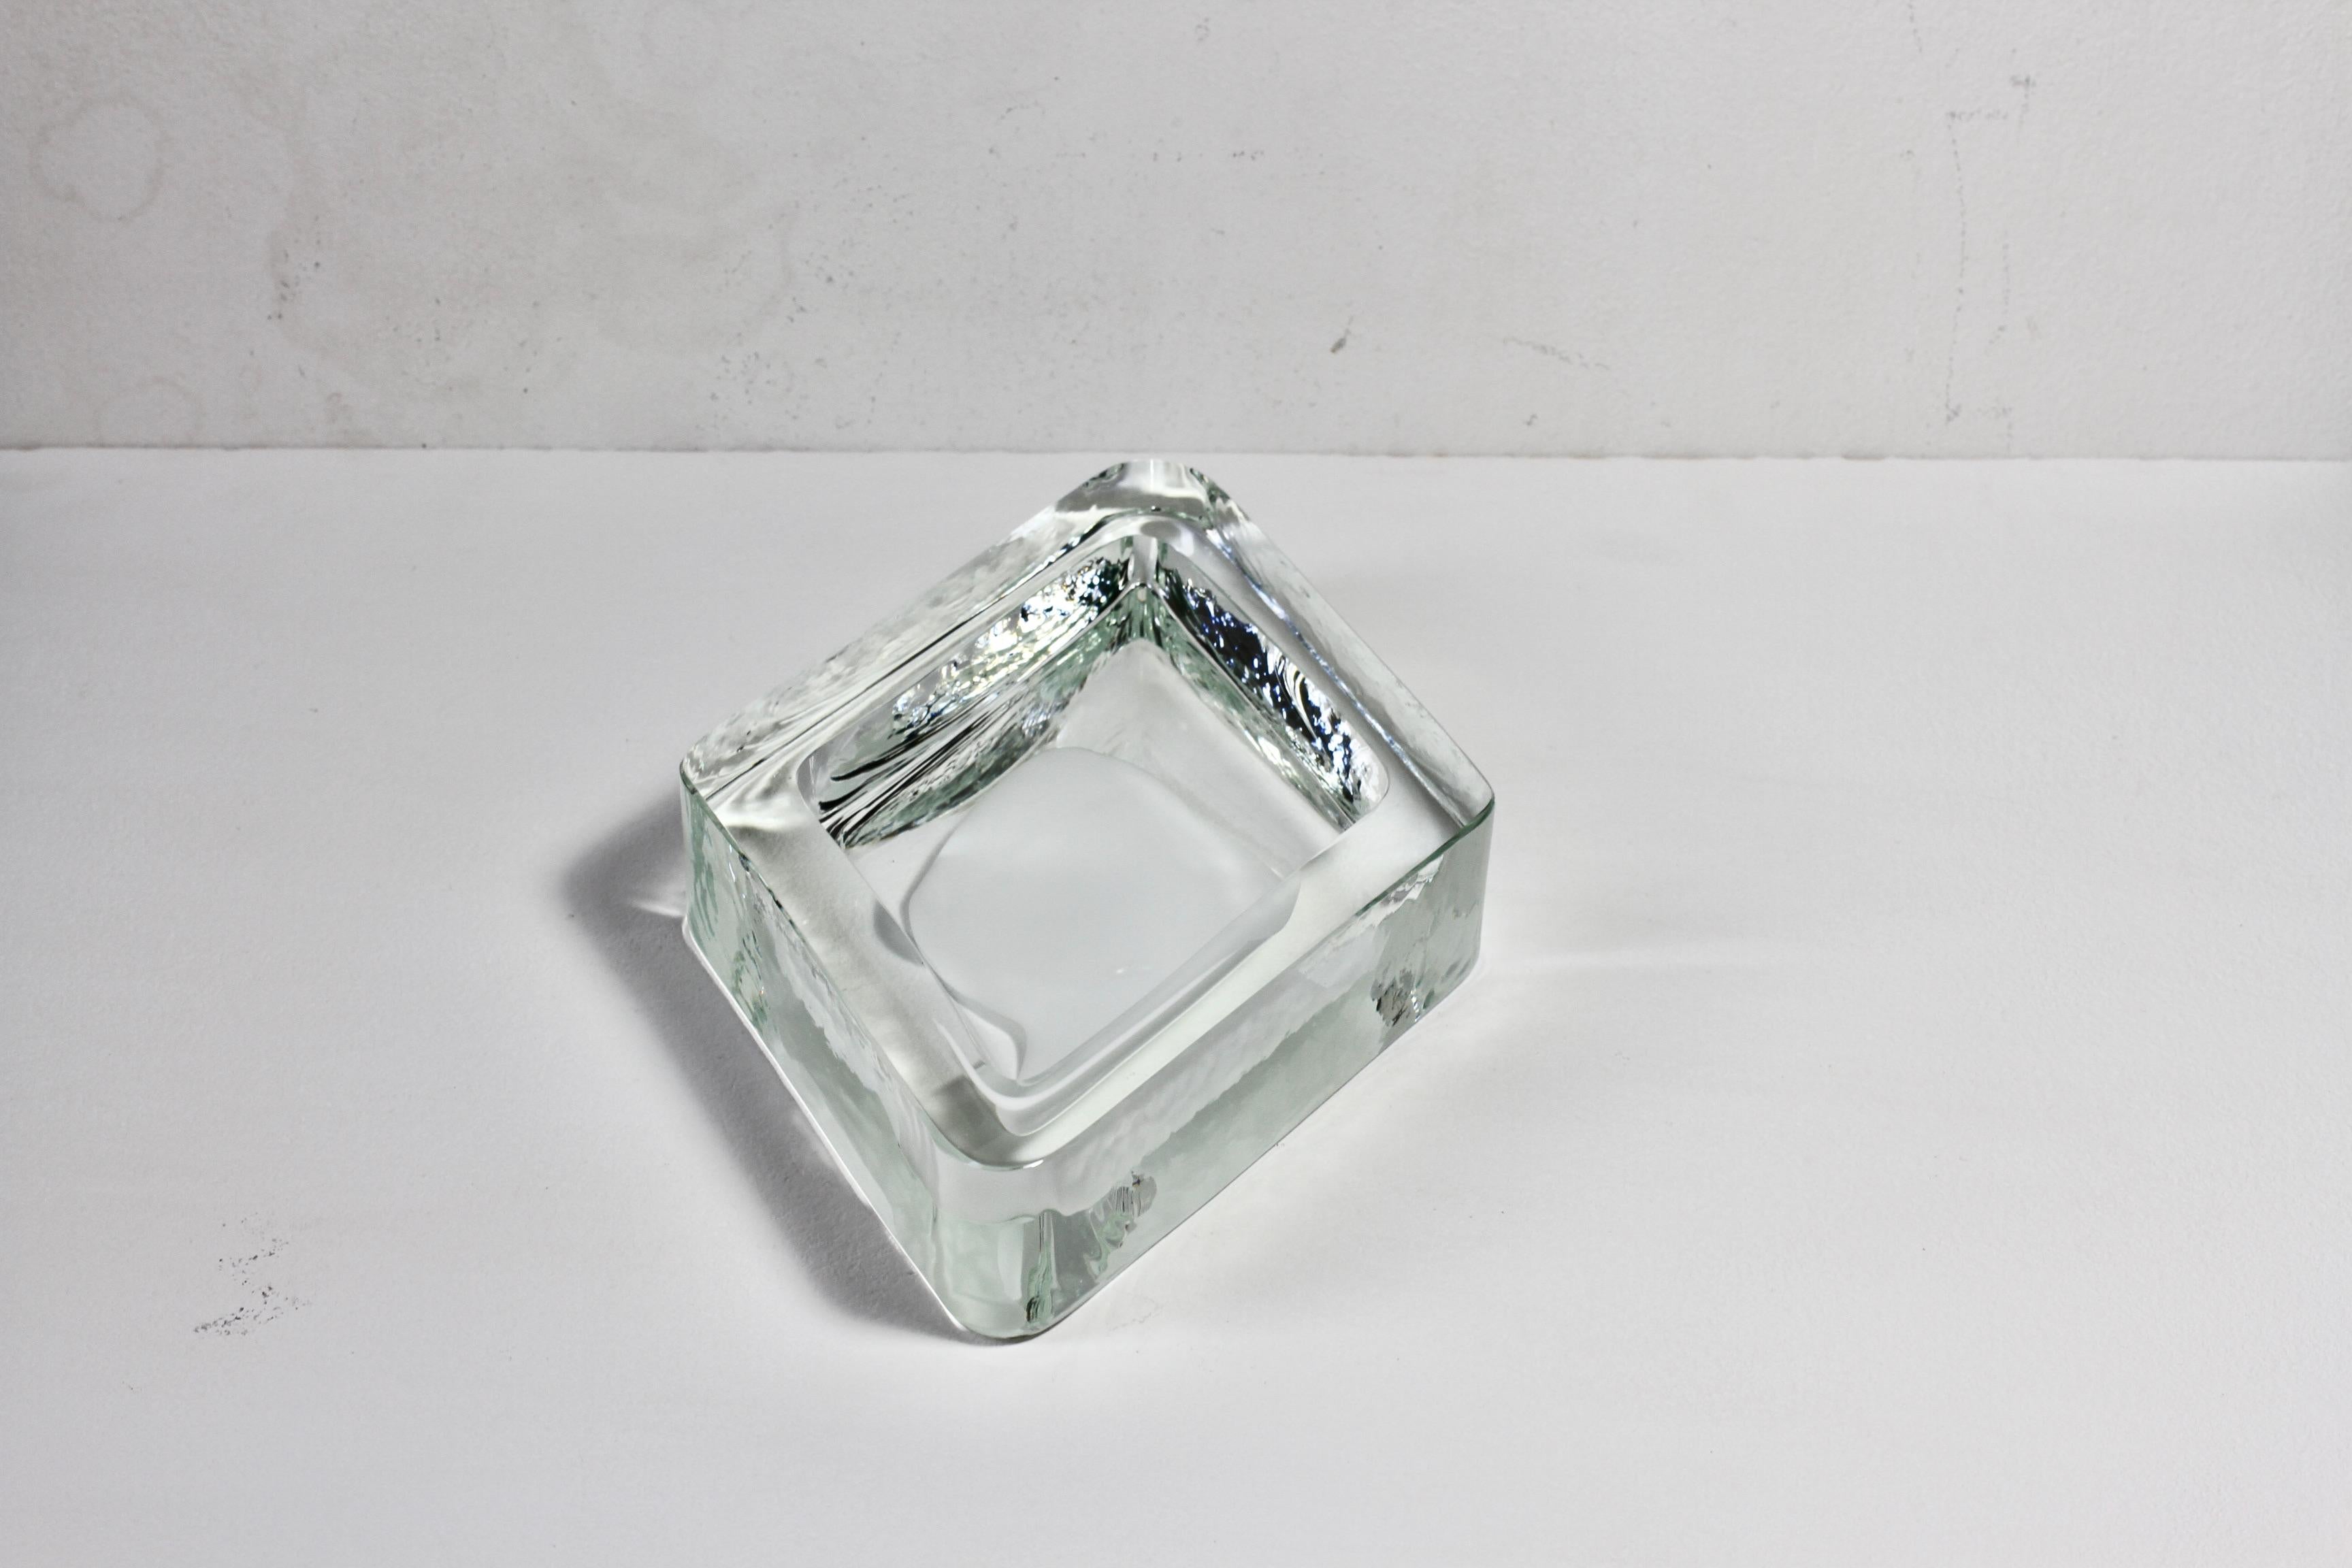 Huge Cenedese Italian Rhombus White and Clear Murano Glass Bowl, Dish, Ashtray For Sale 5